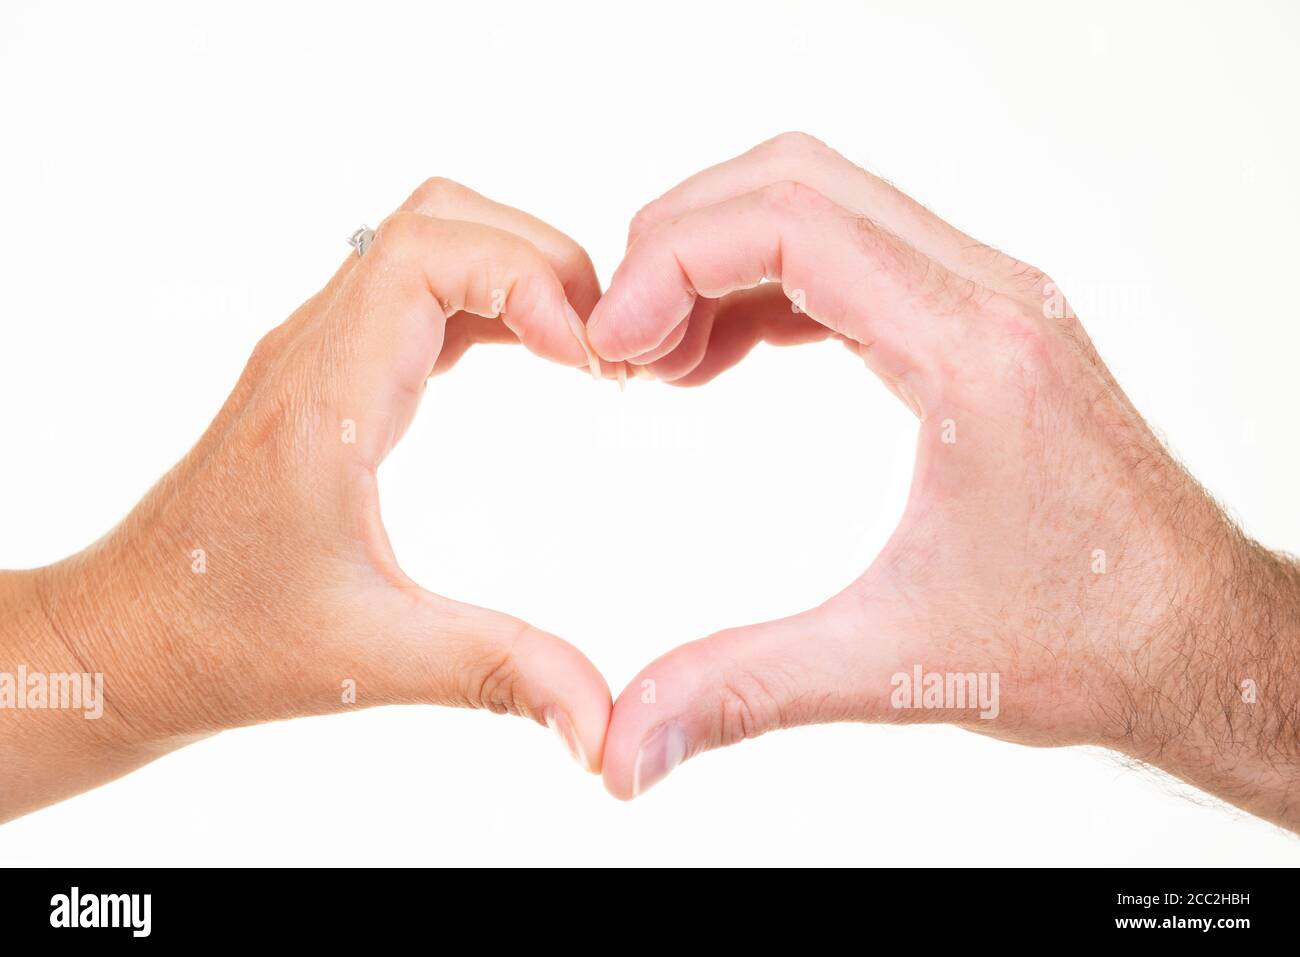 Horizontal close up of a man and woman doing the hand heart symbol against a white background. Stock Photo